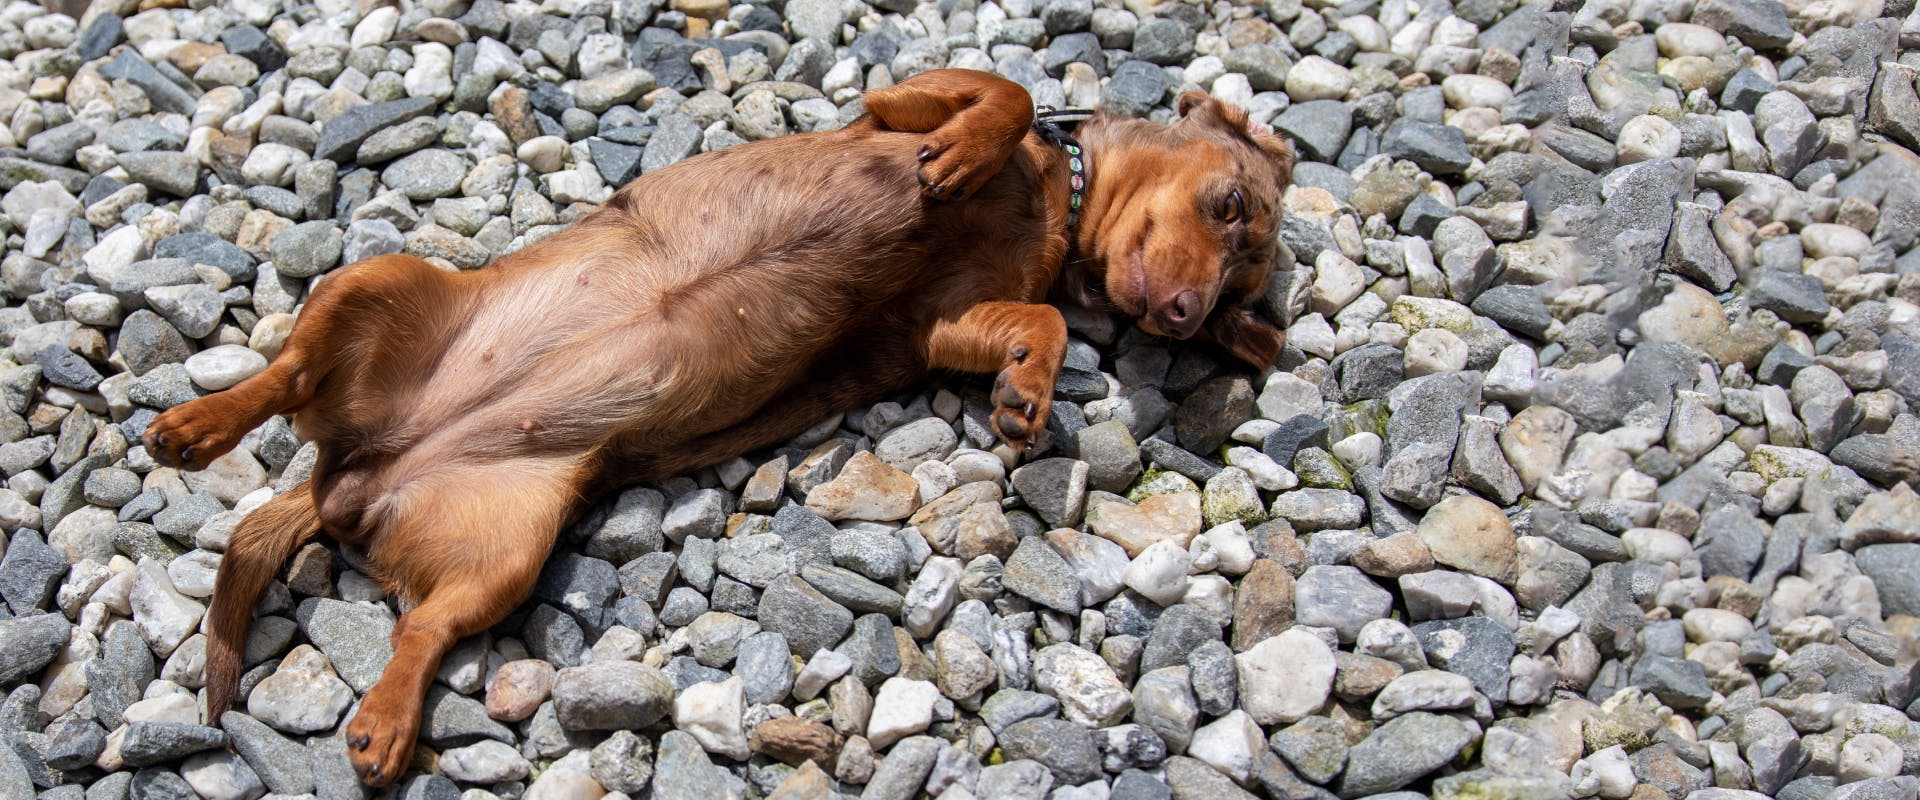 A dog showing belly while lying on the beach.